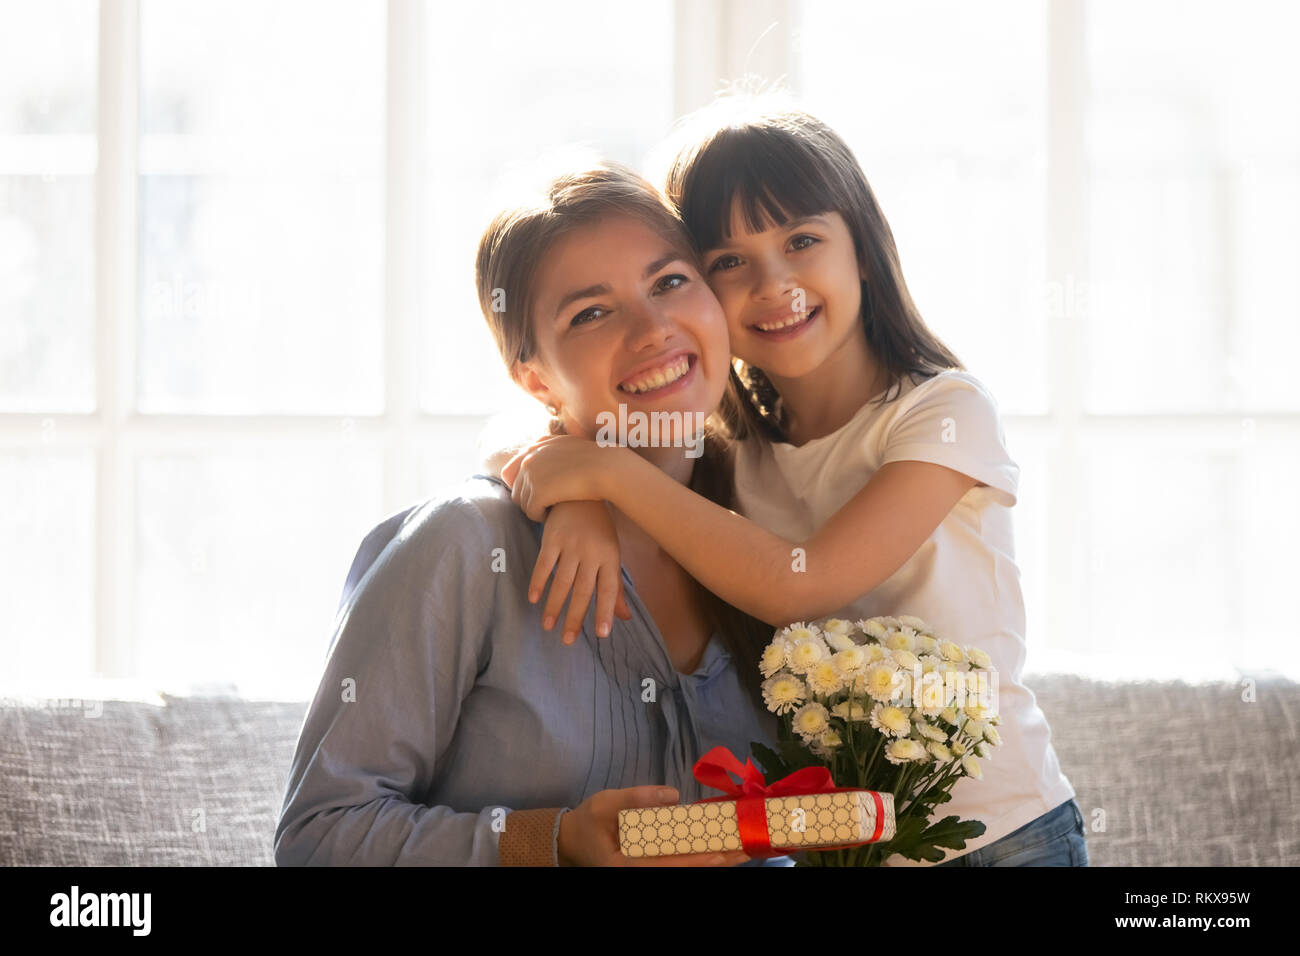 Happy kid daughter embracing mom holding flowers bouquet and gift Stock Photo